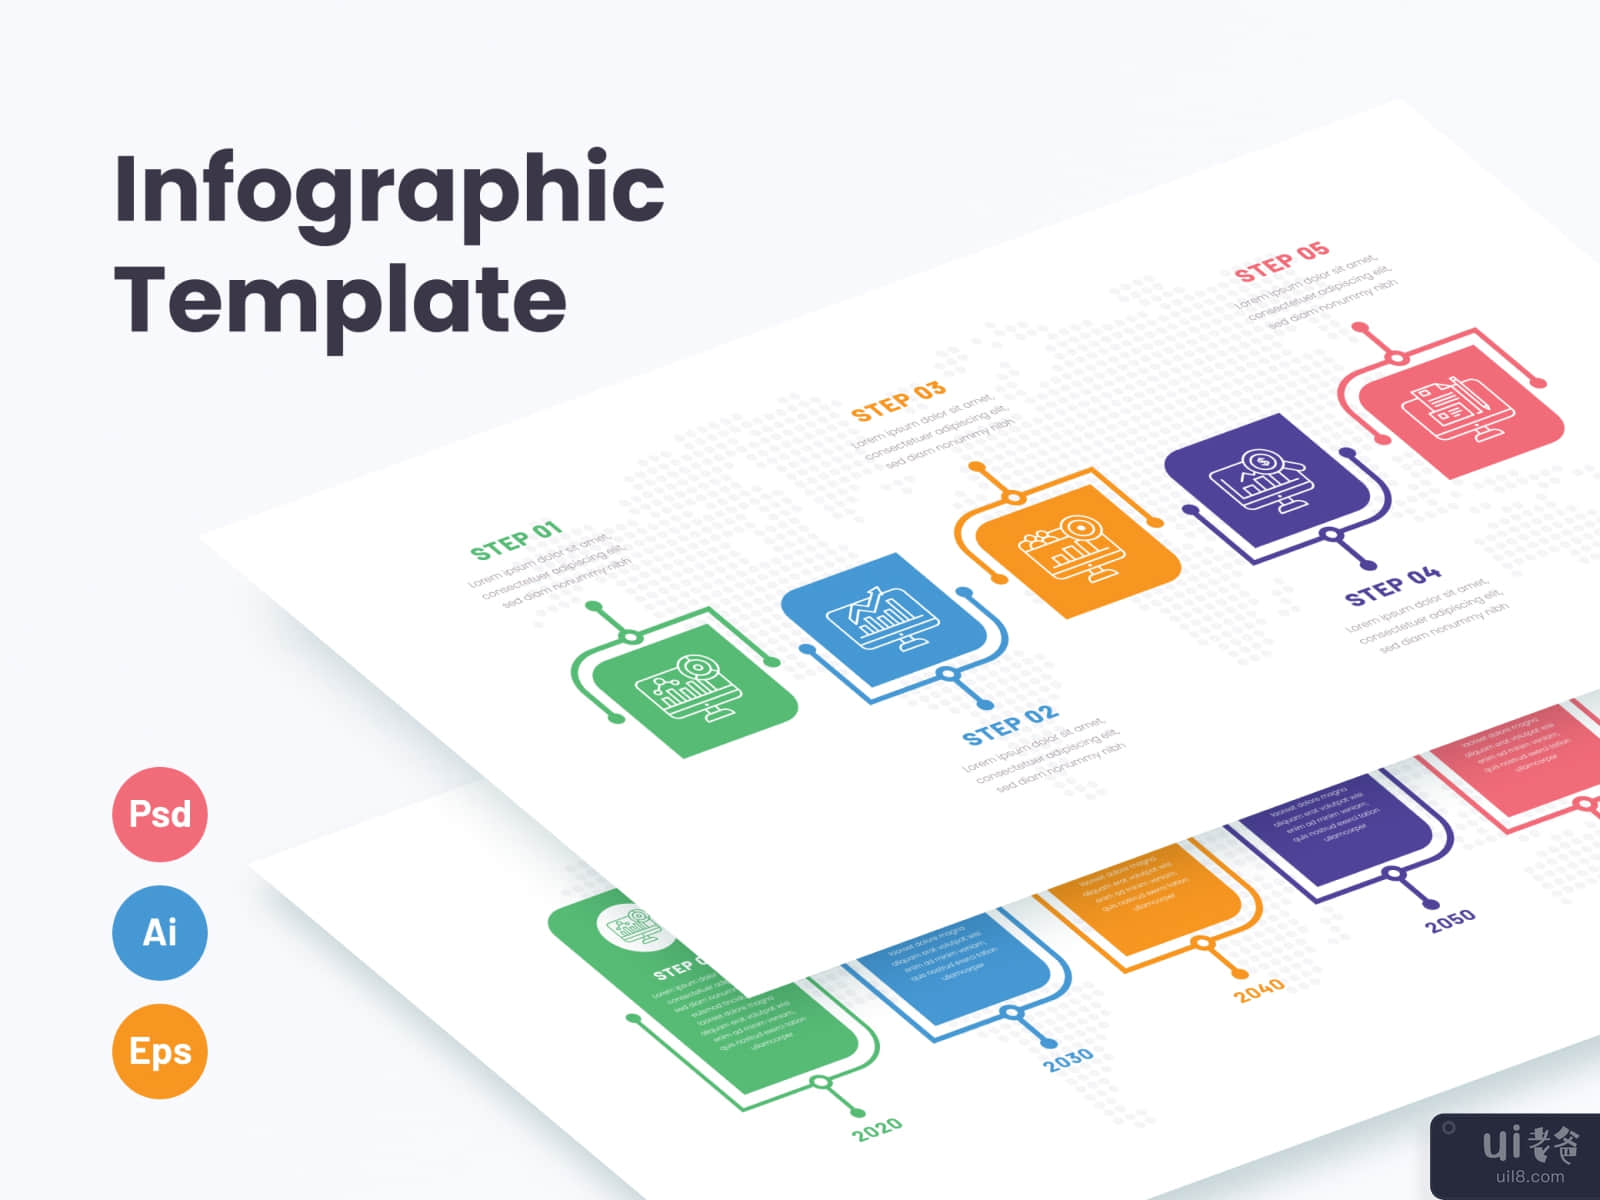 Infographic template